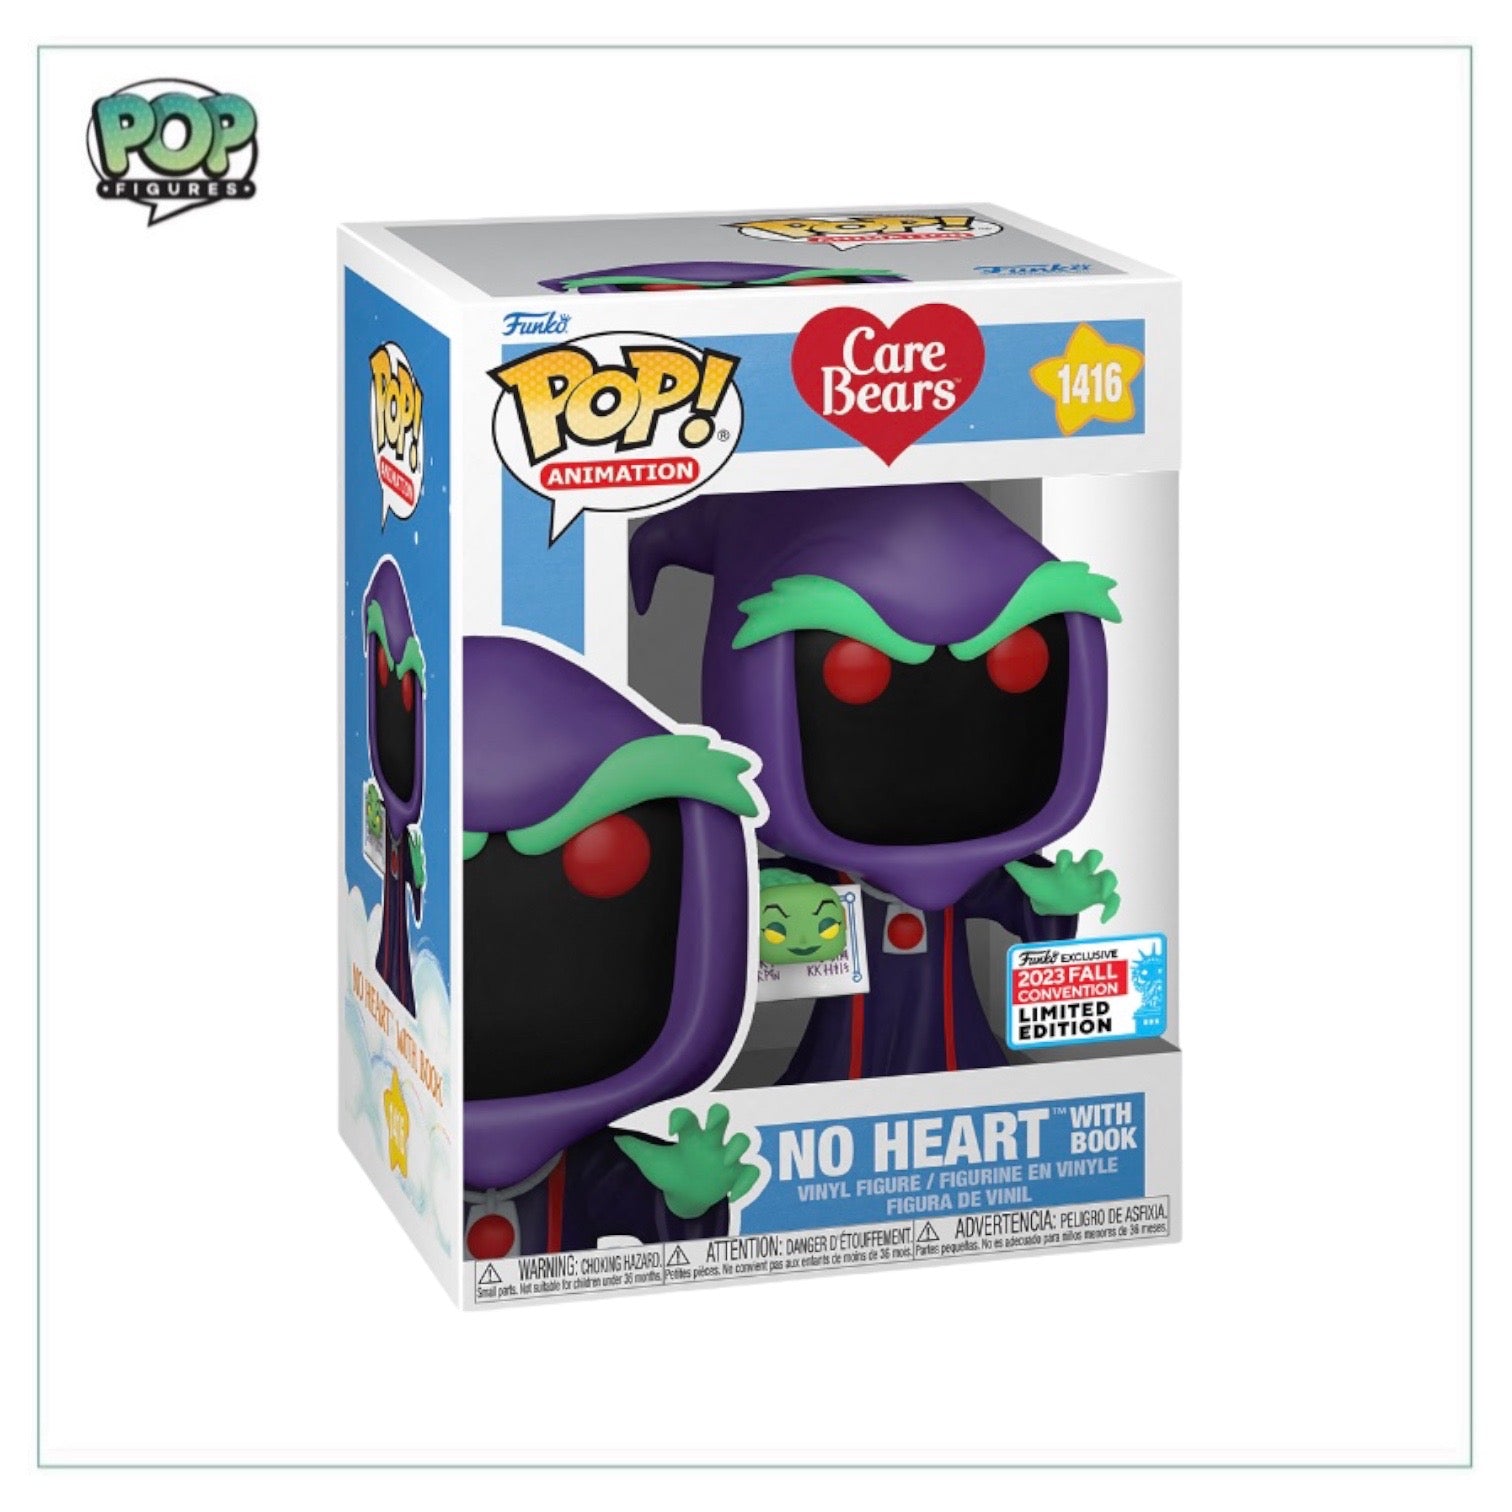 No Heart with Book #1416 Funko Pop! - Care Bears - NYCC 2023 Shared Exclusive